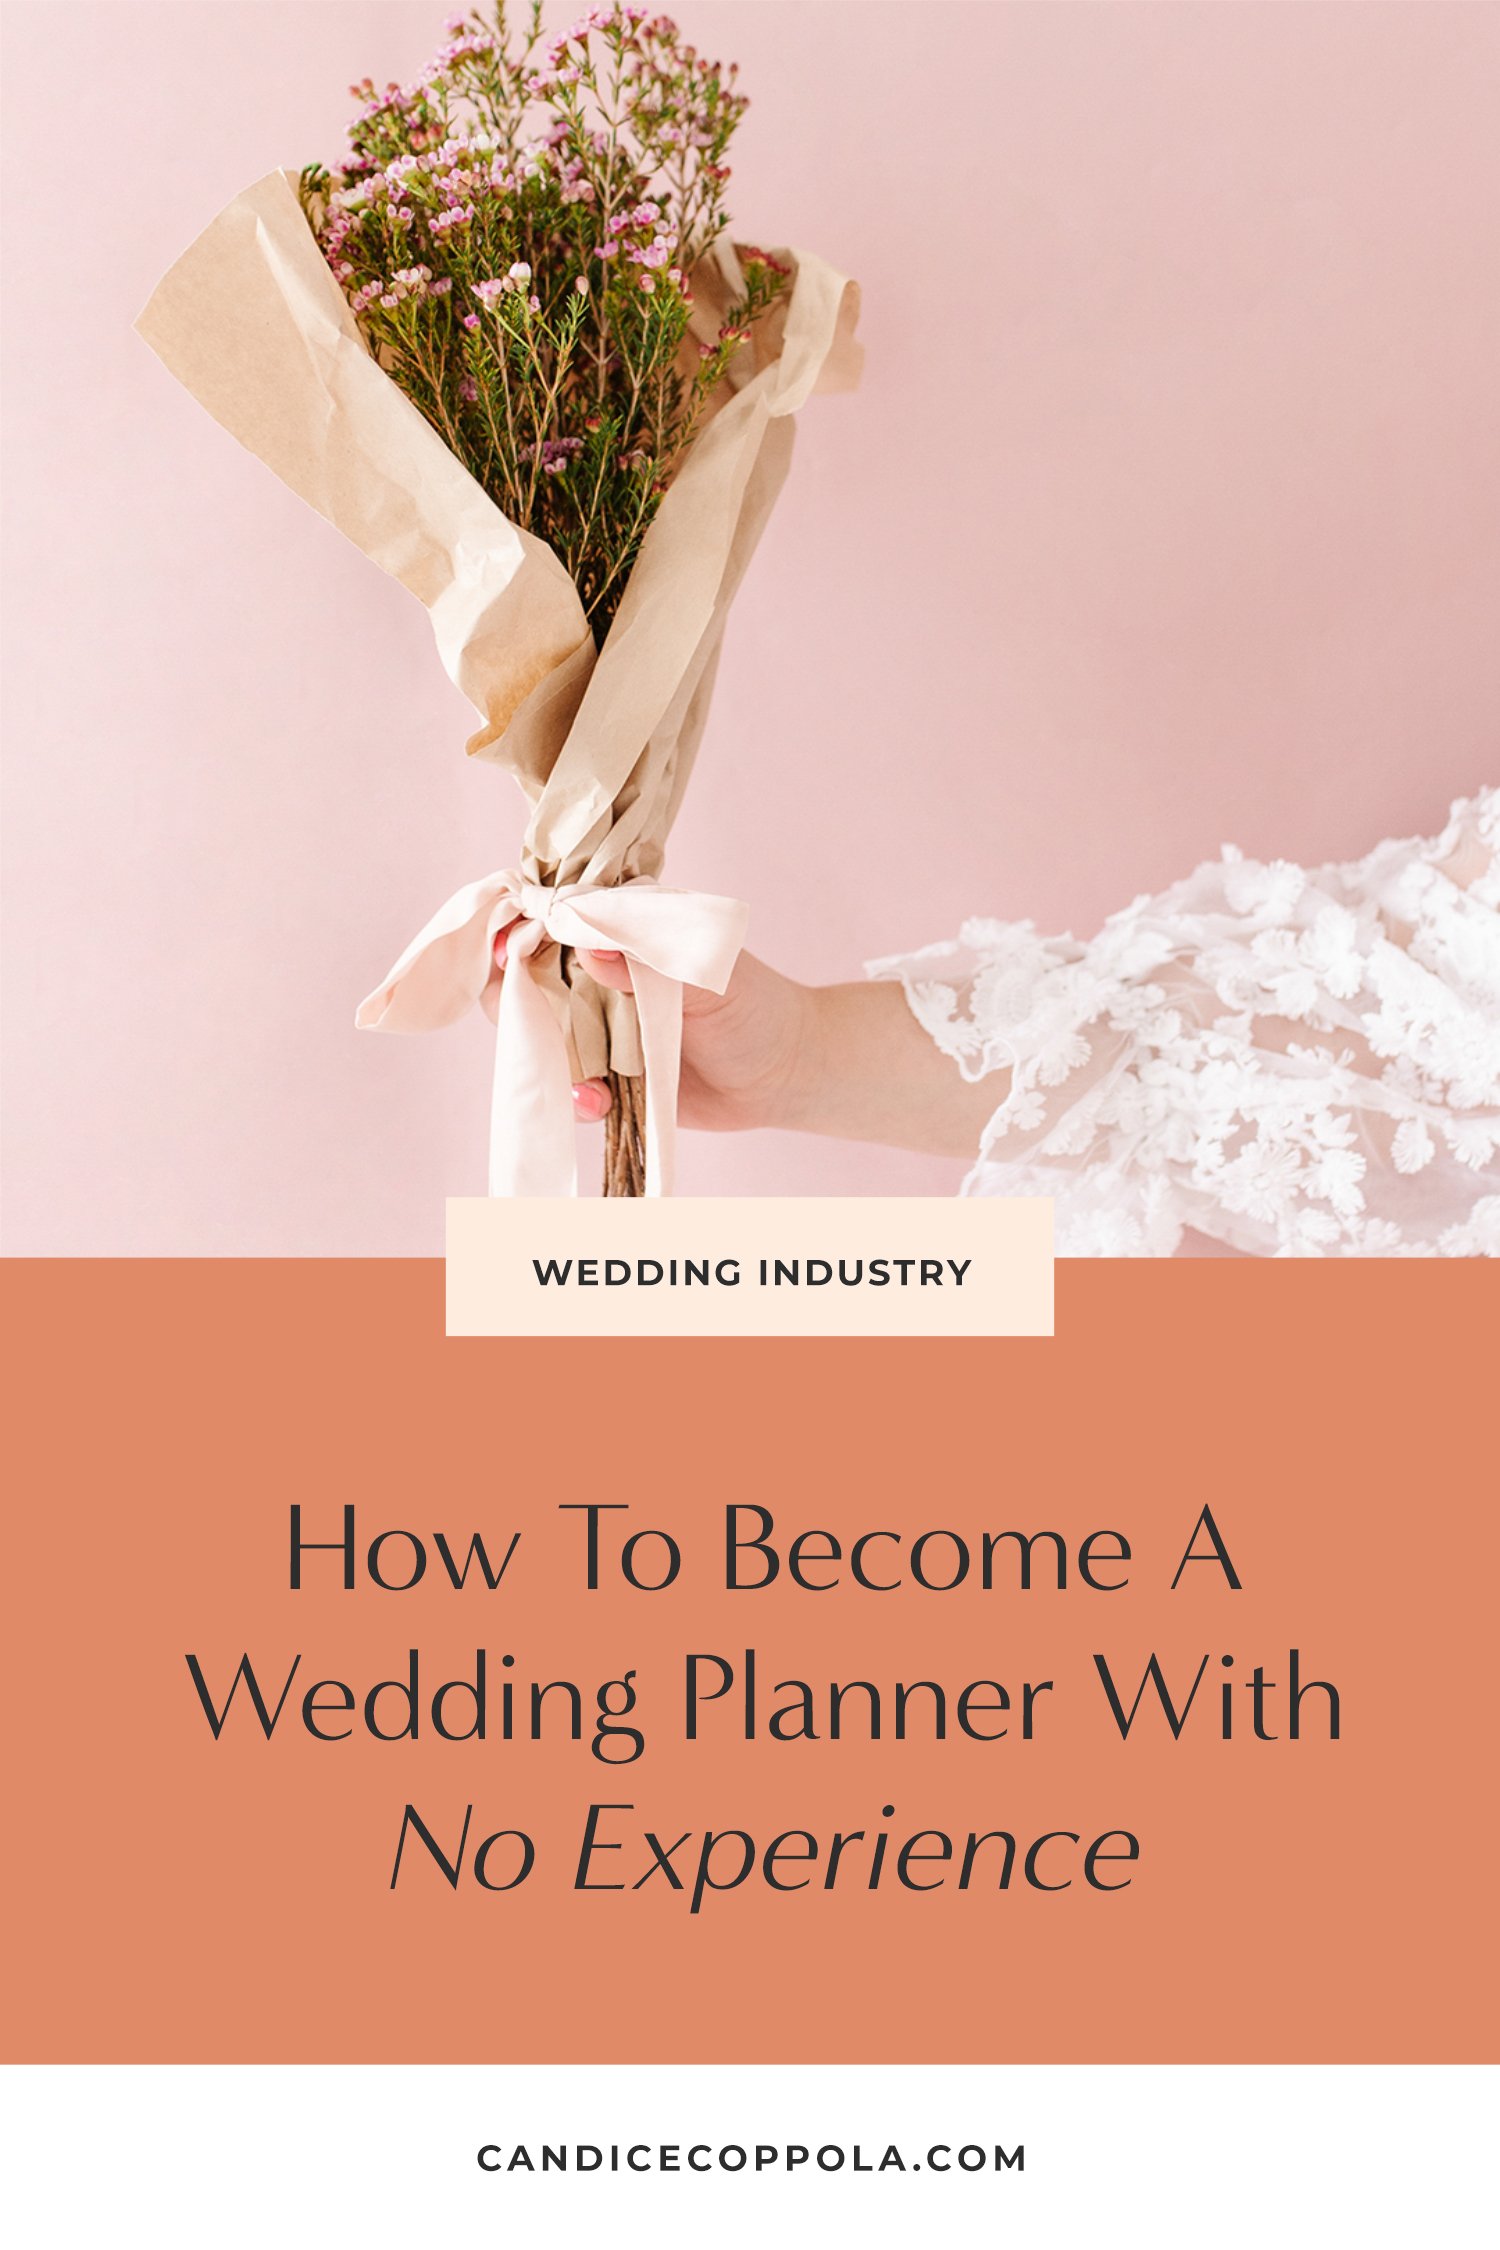 How To Become A Wedding Planner With No Experience